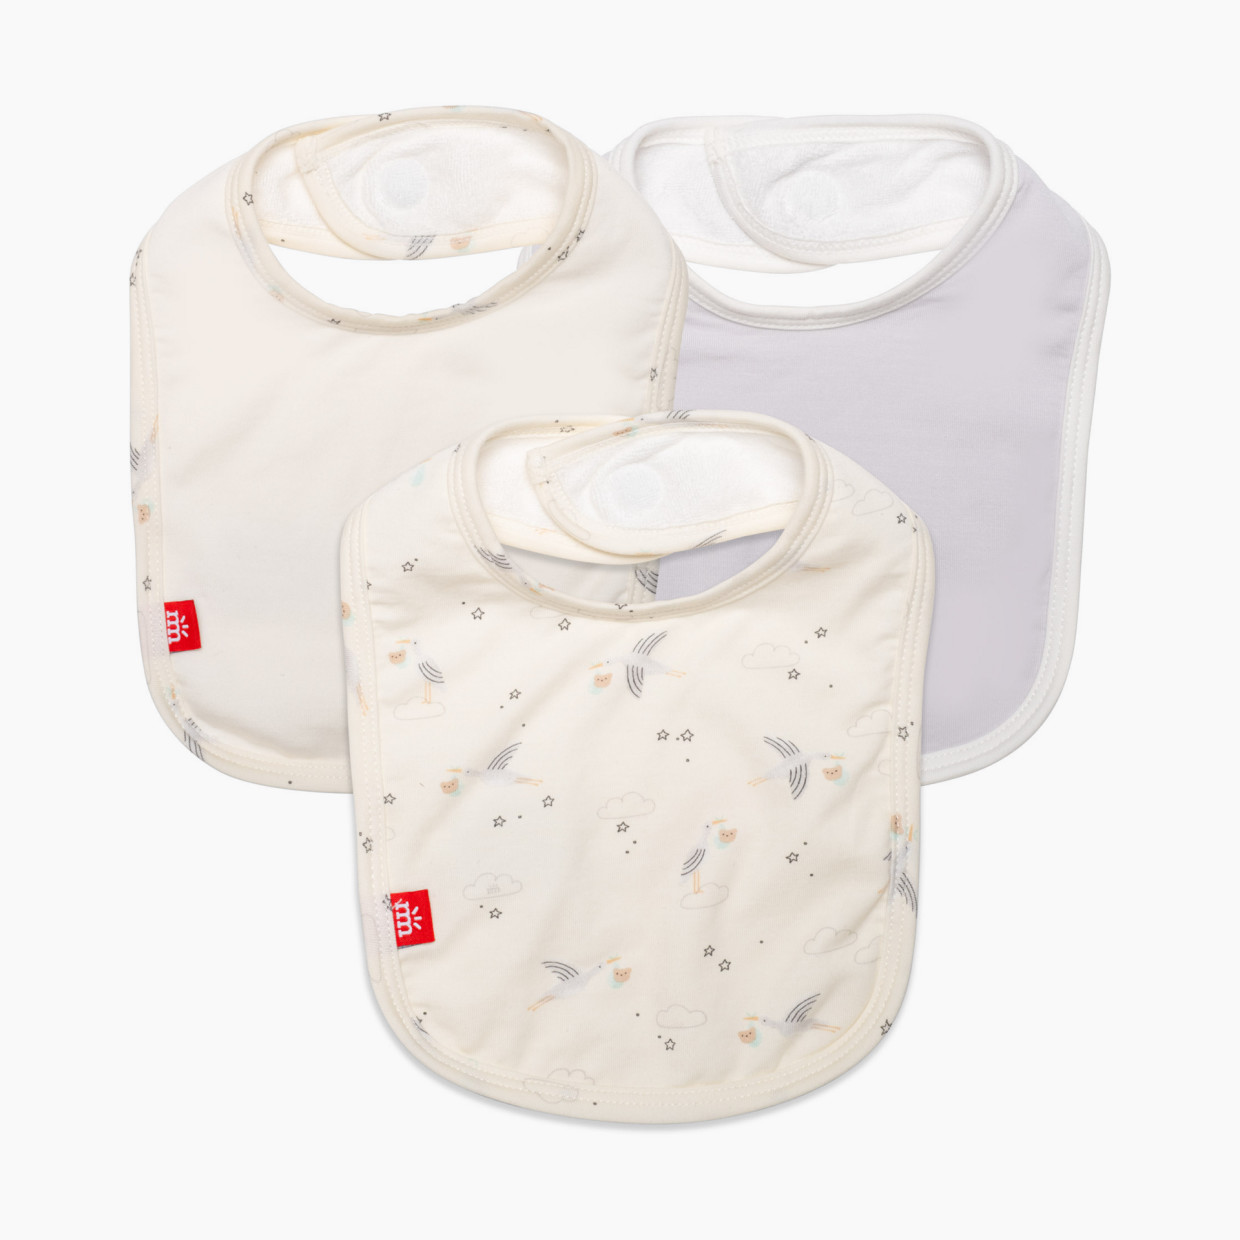 Magnetic Me Modal 3 Pack Bibs - Beary Special, One Size.